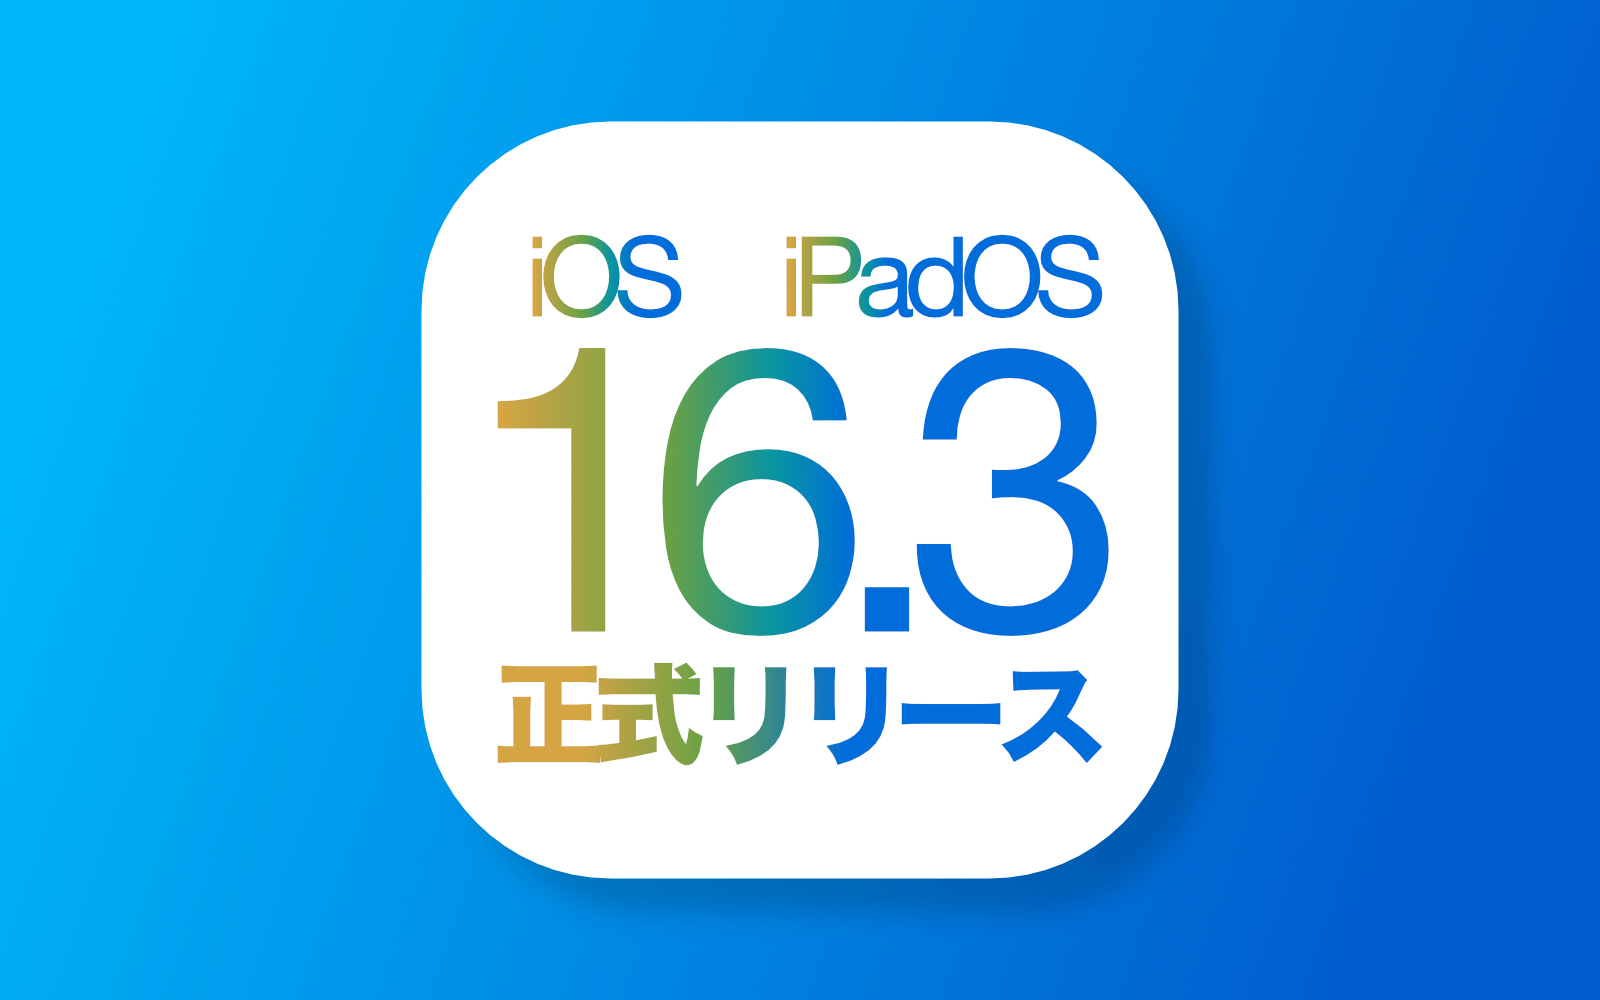 IOS16 3 official release